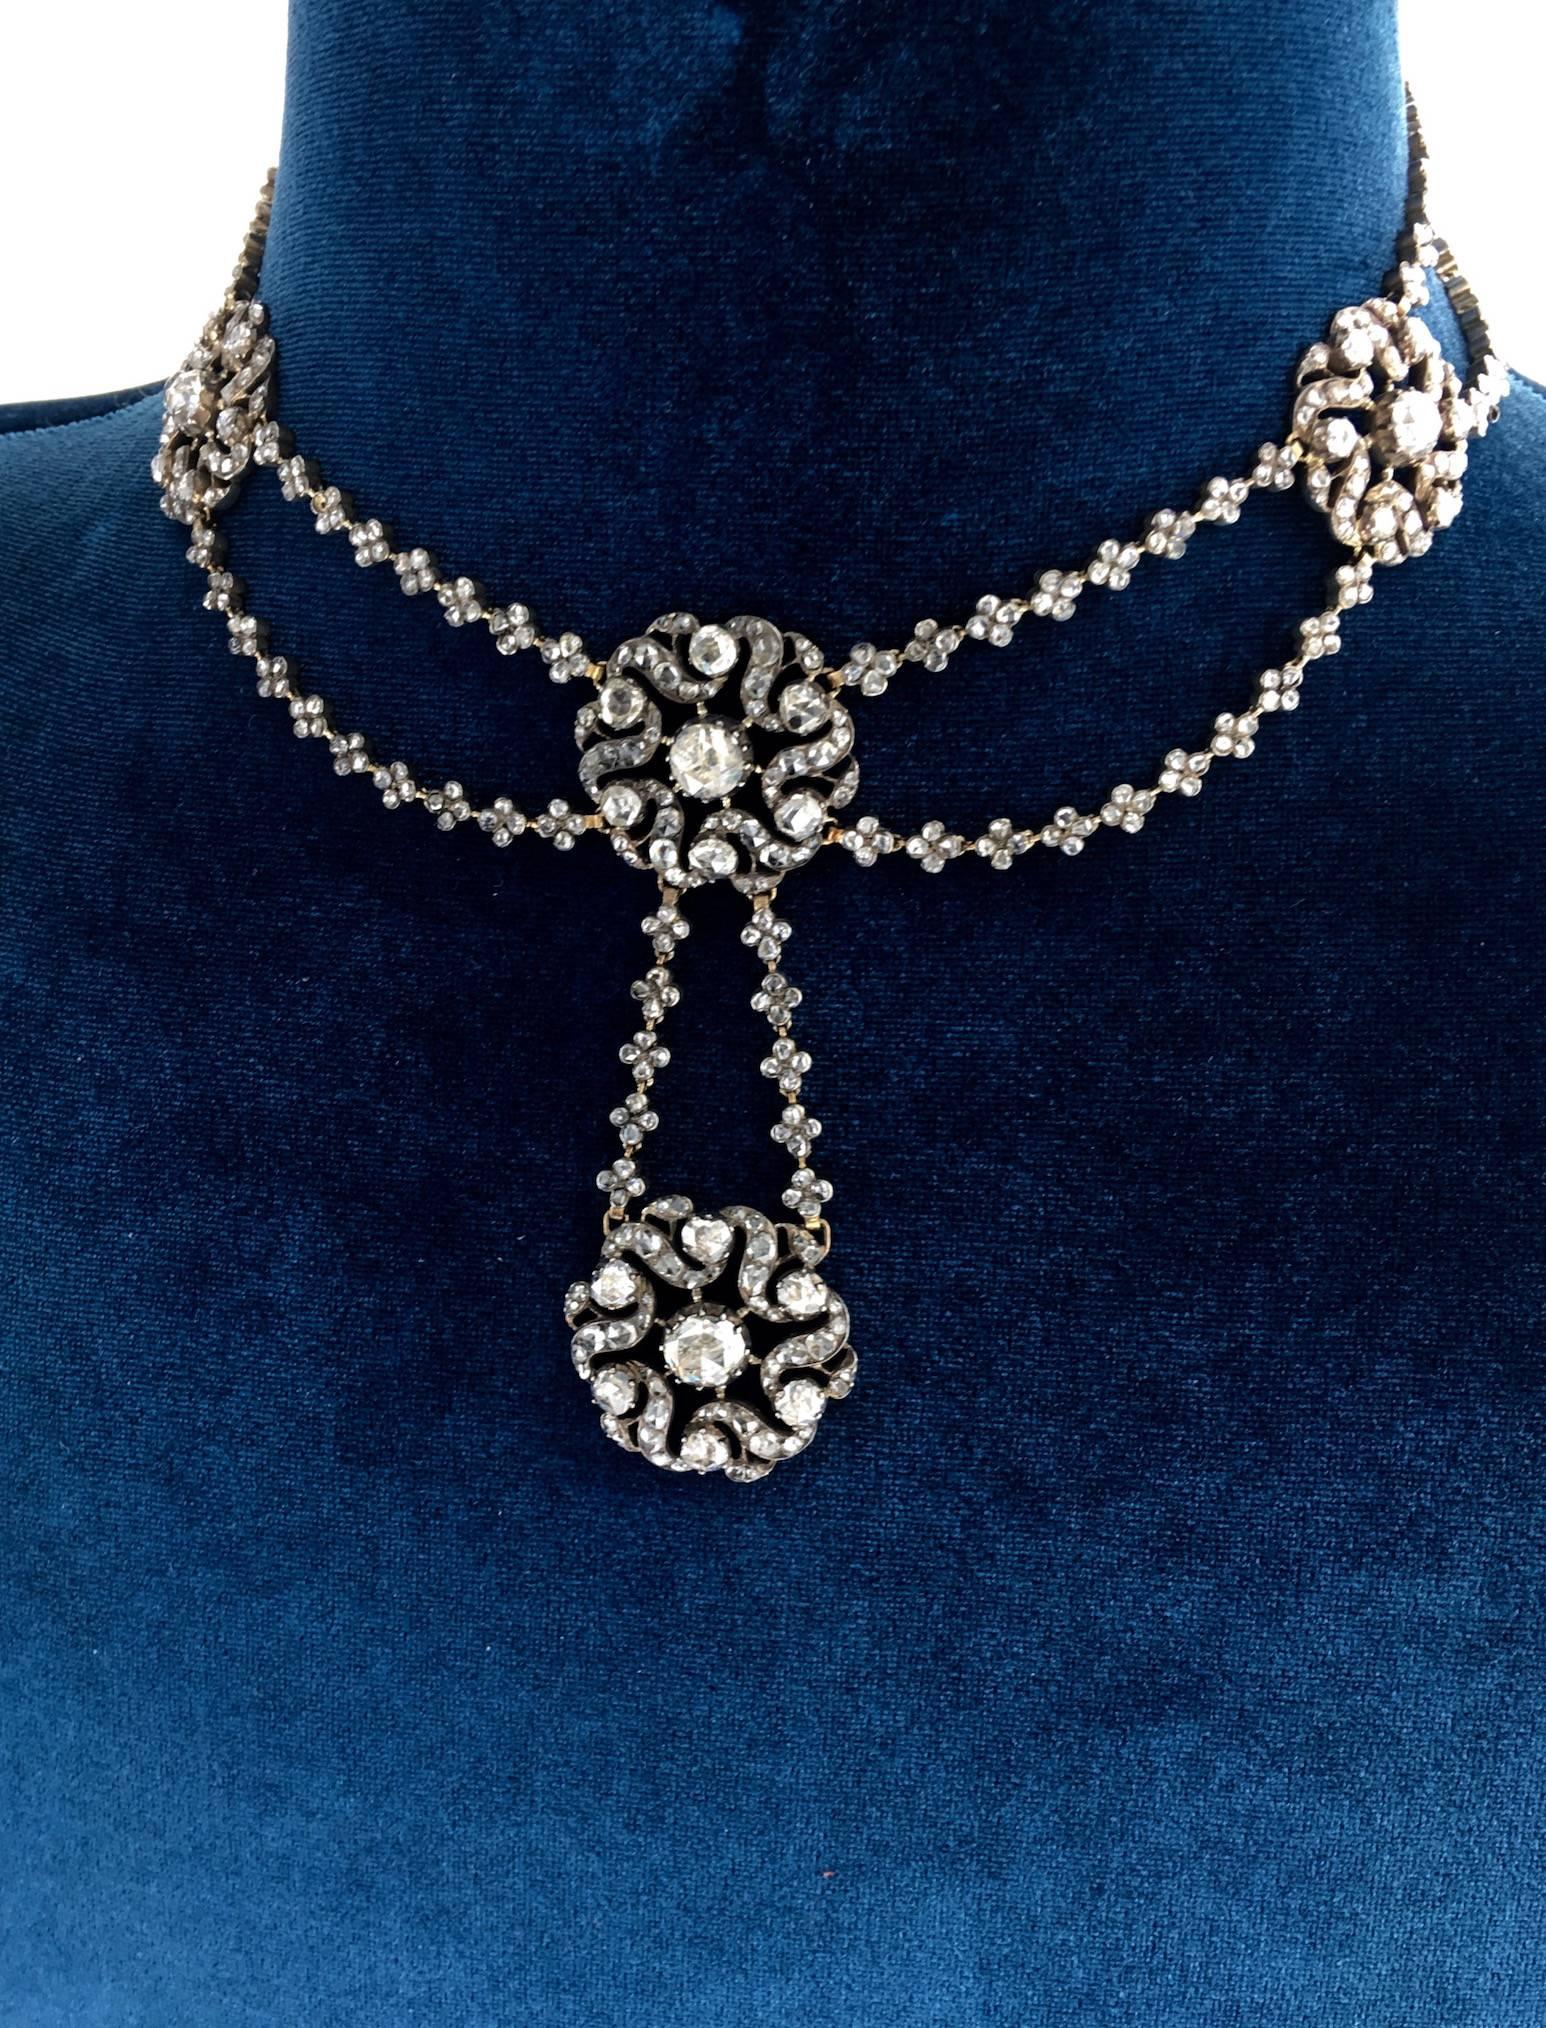 A Superb Necklace! Unbelievable once worn.
It is so rare to find such a piece from the early XIXth Century.
We easily imagine the Empress of Austria wearing this masterpiece. We are glad to share this stunning jewel which is above all totally